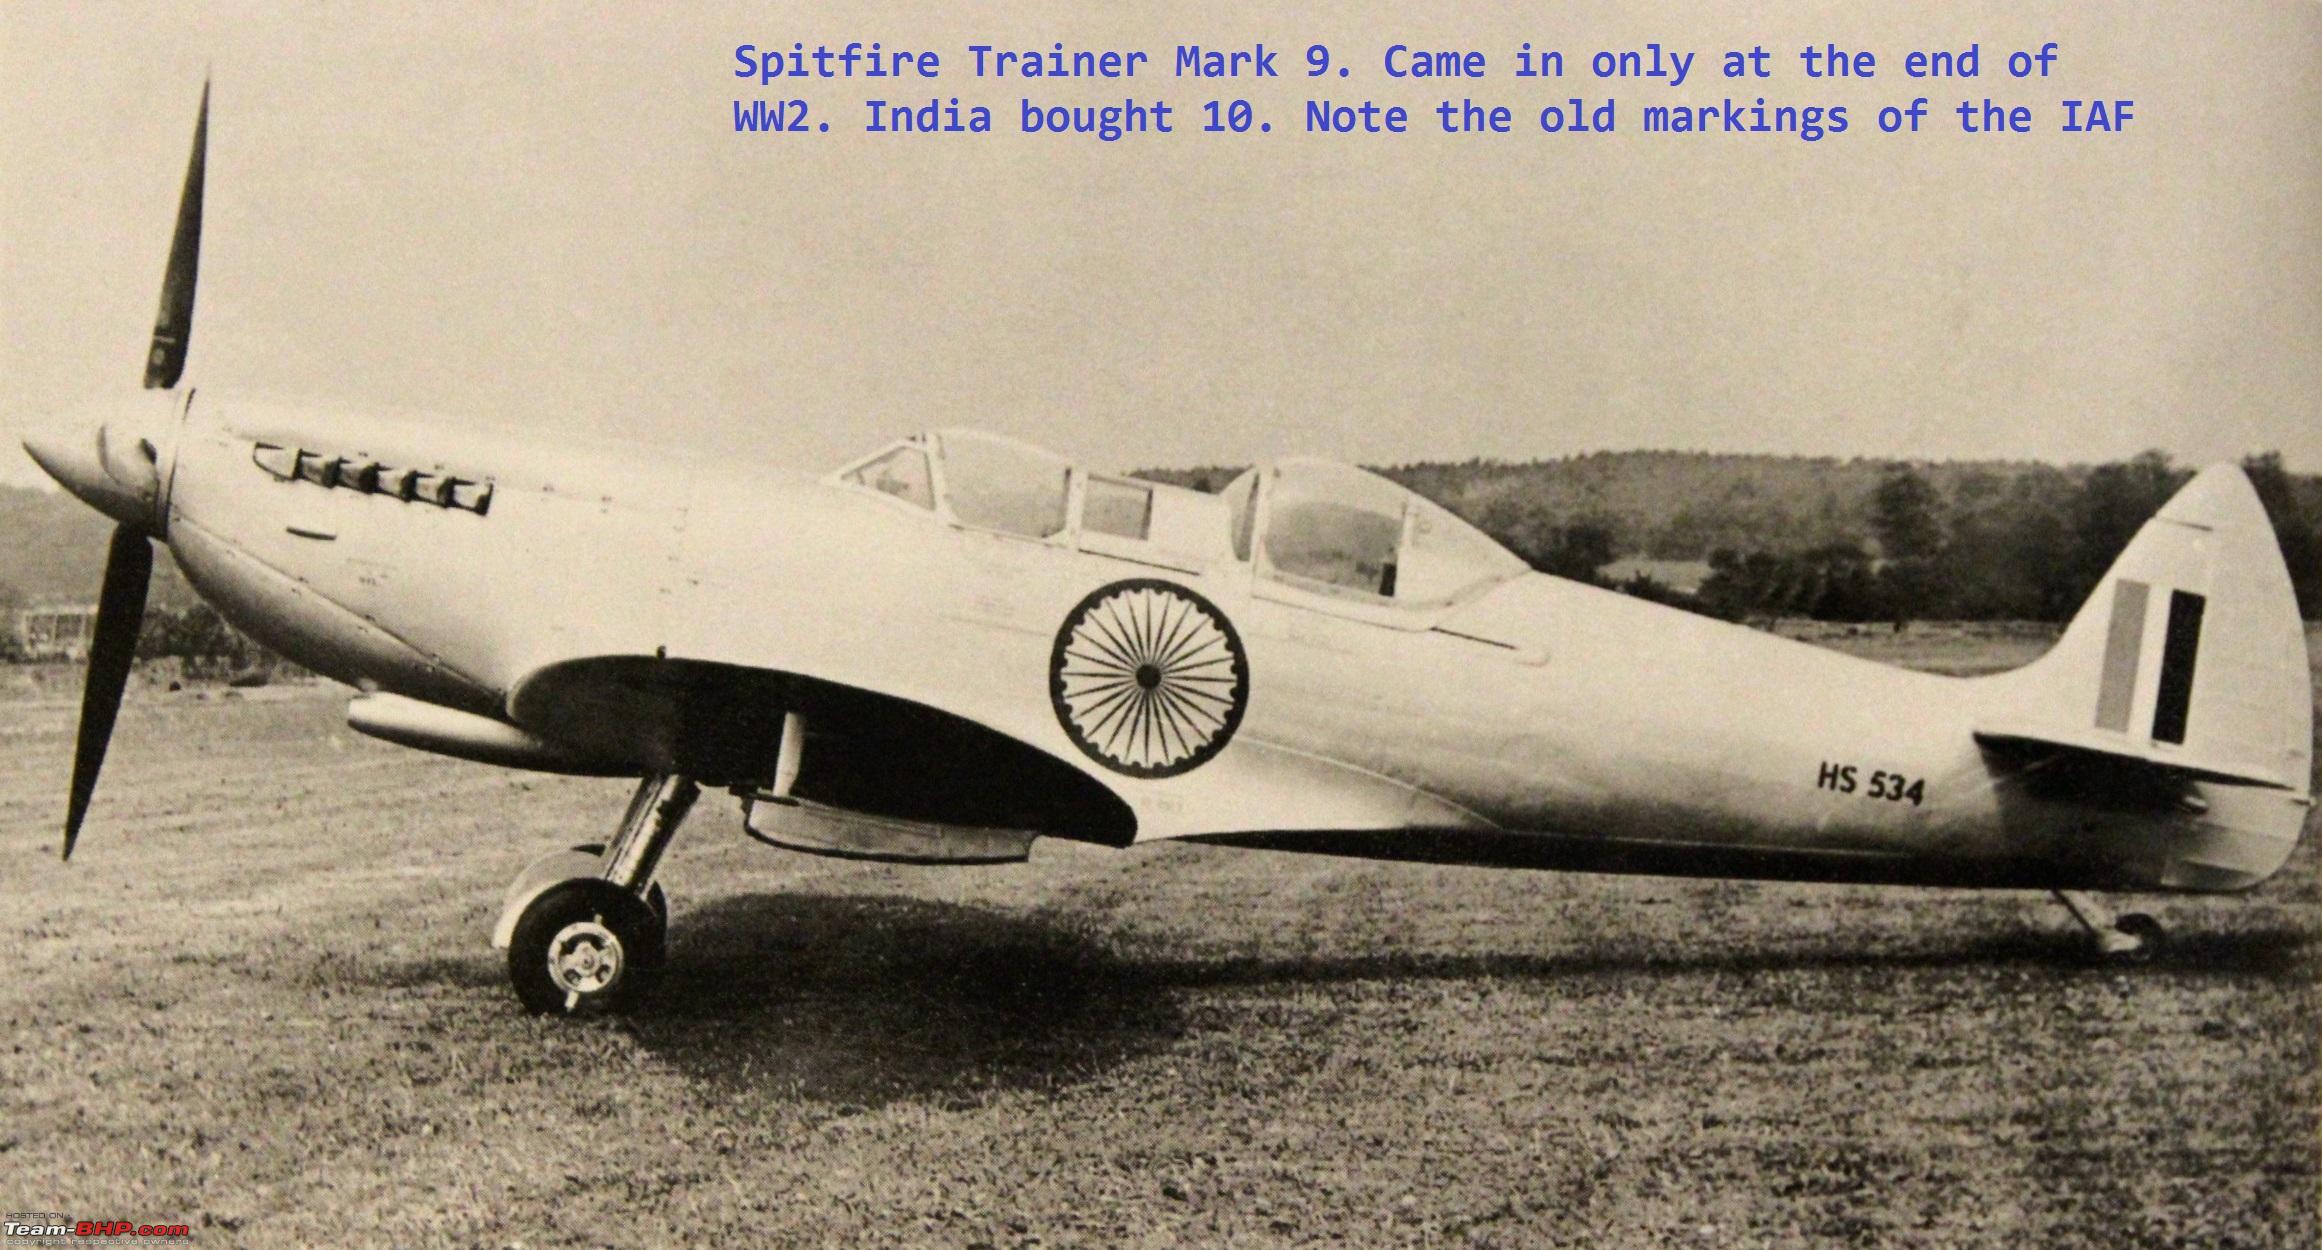 Essay on air force indian